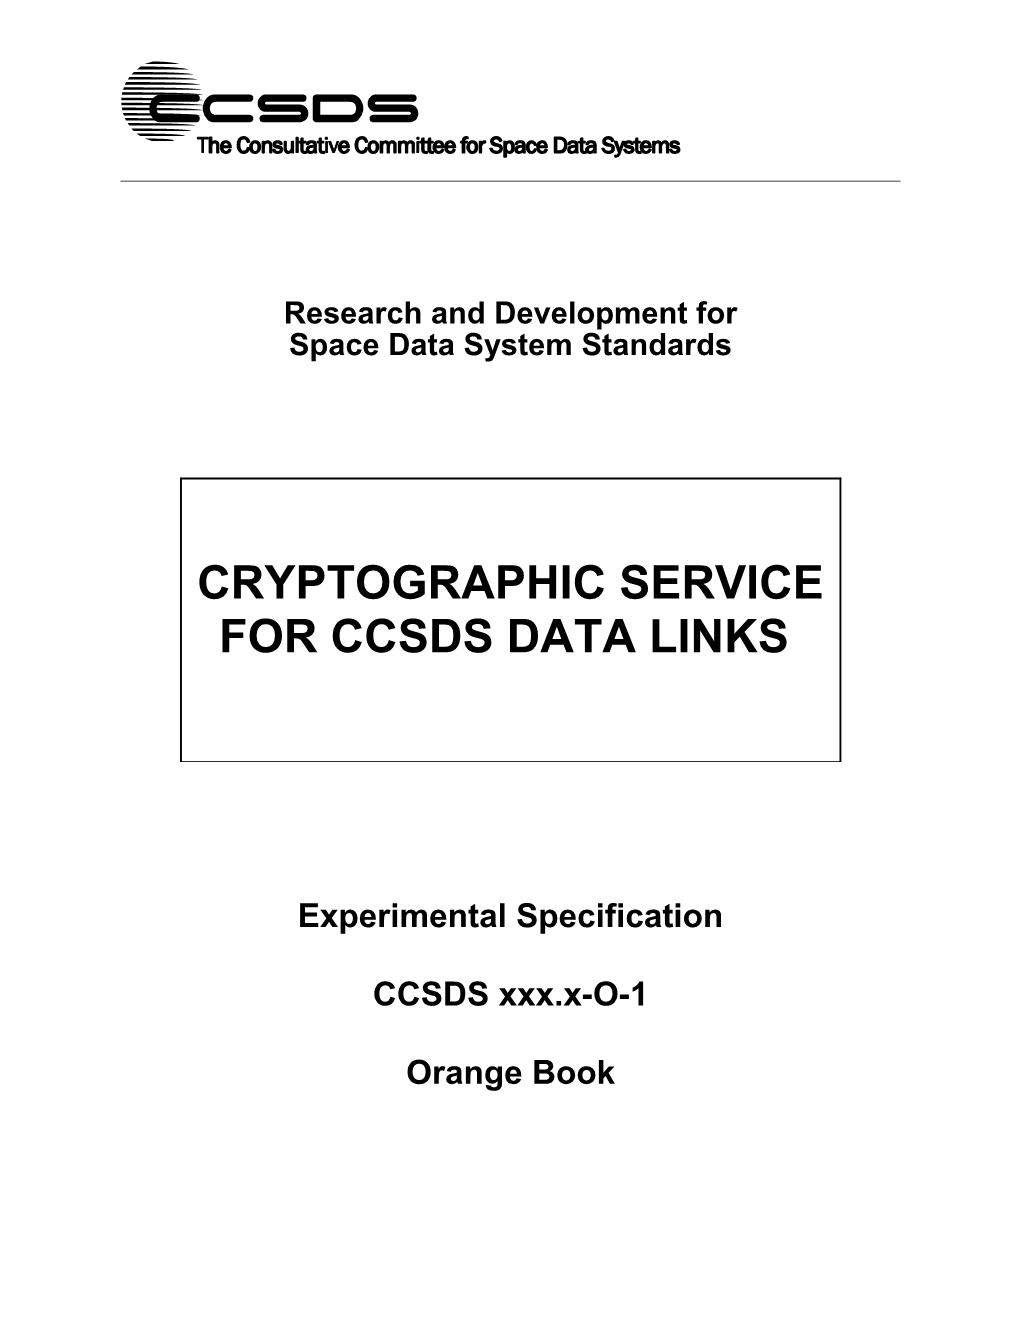 Research and Development for Space Data System Standards